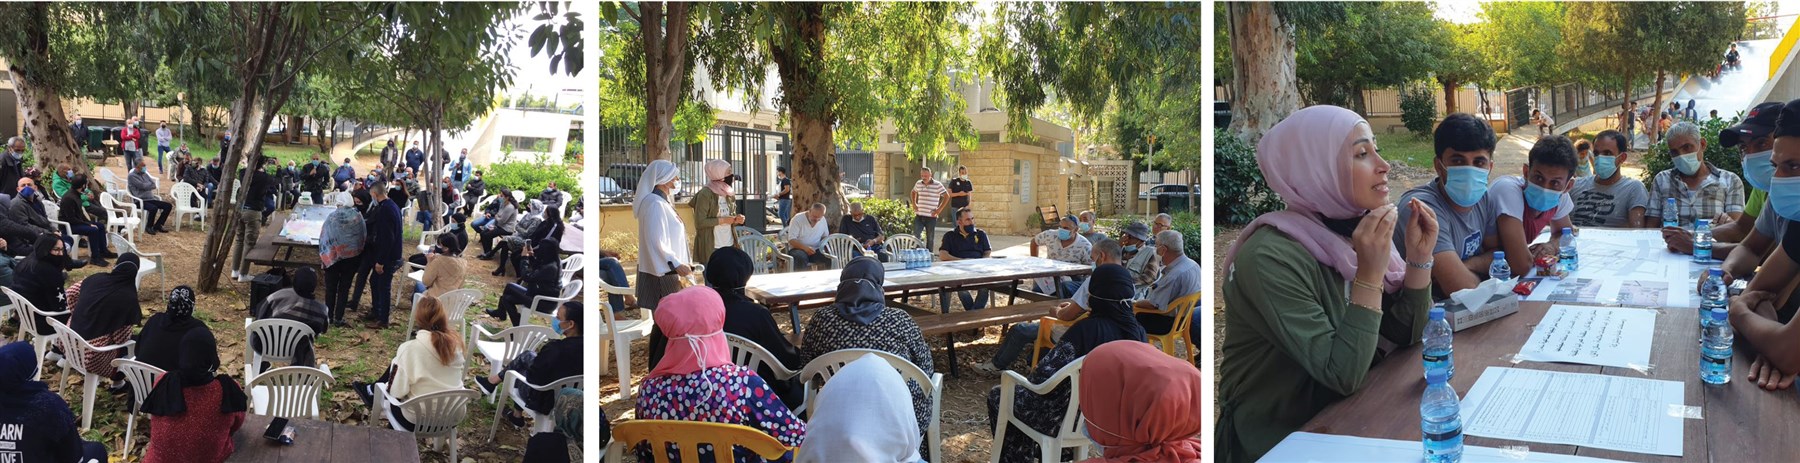 Town hall meetings in the public garden in Karantina on 11 April and 30 June 2021. Source: Left: Batoul Yassine, 2021, Middle and right: Yehya Al-Said, 2021